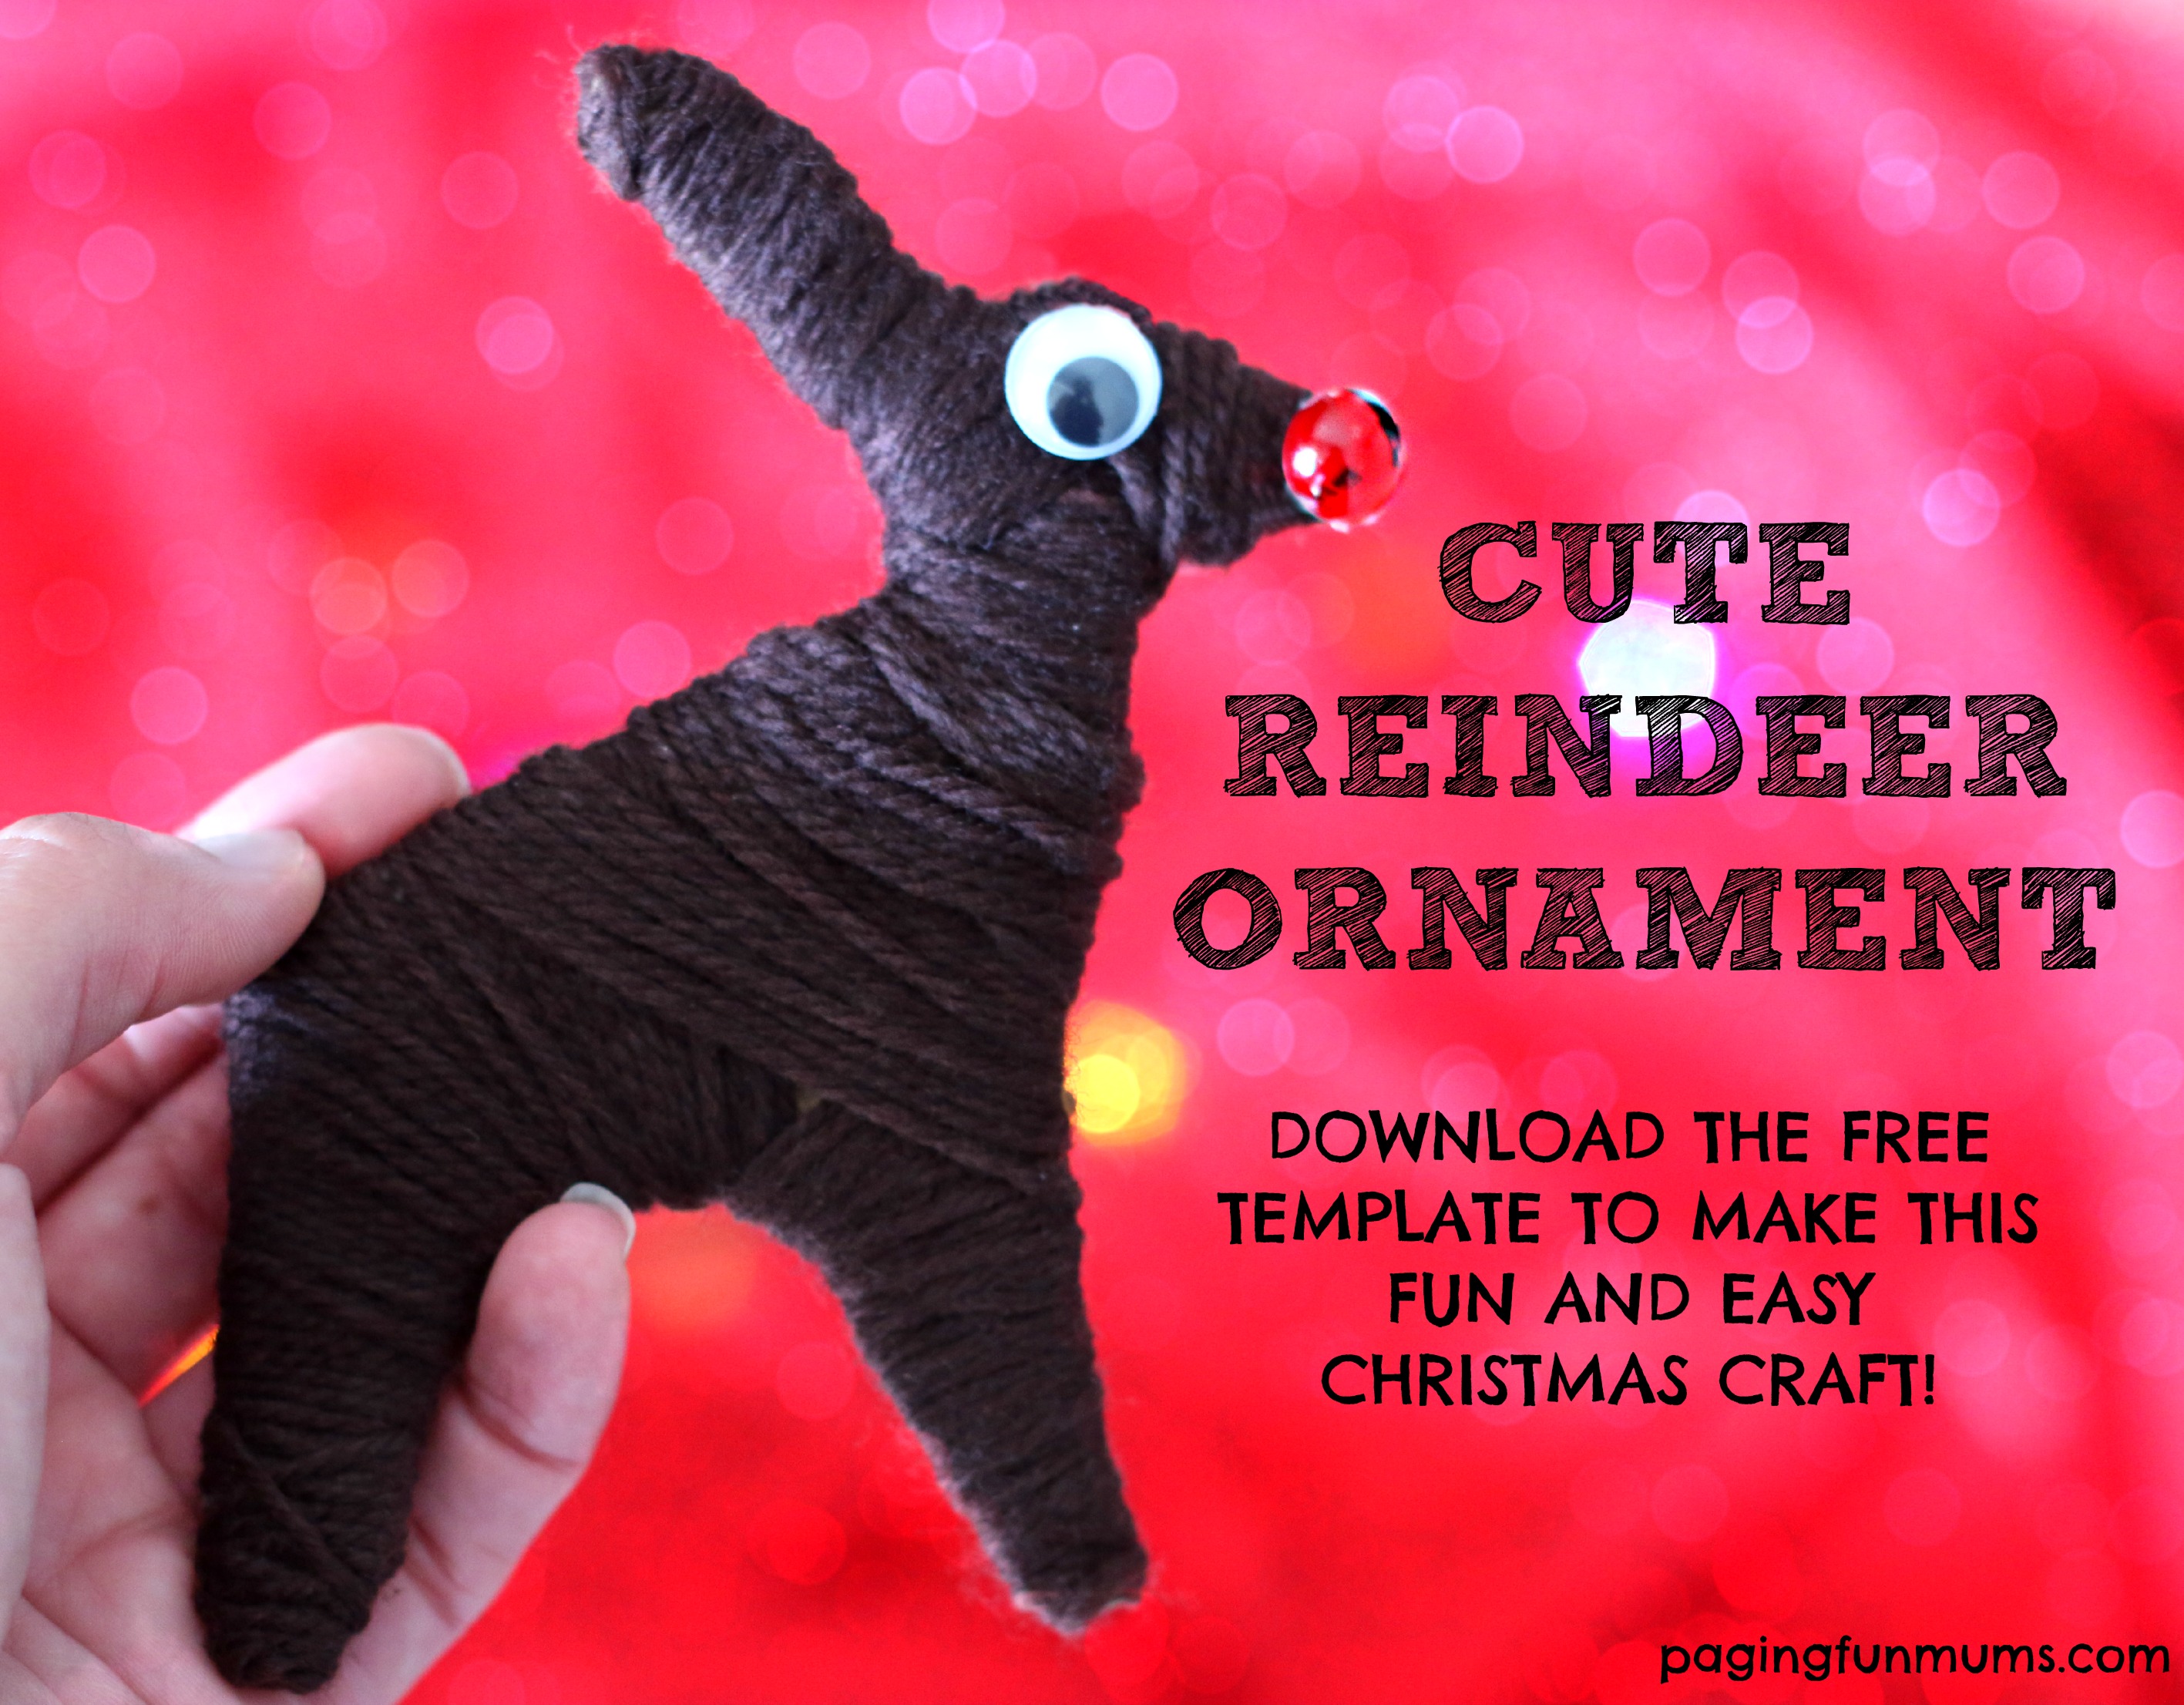 Cute Reindeer Craft - download the FREE template here! So FUN and easy to create!